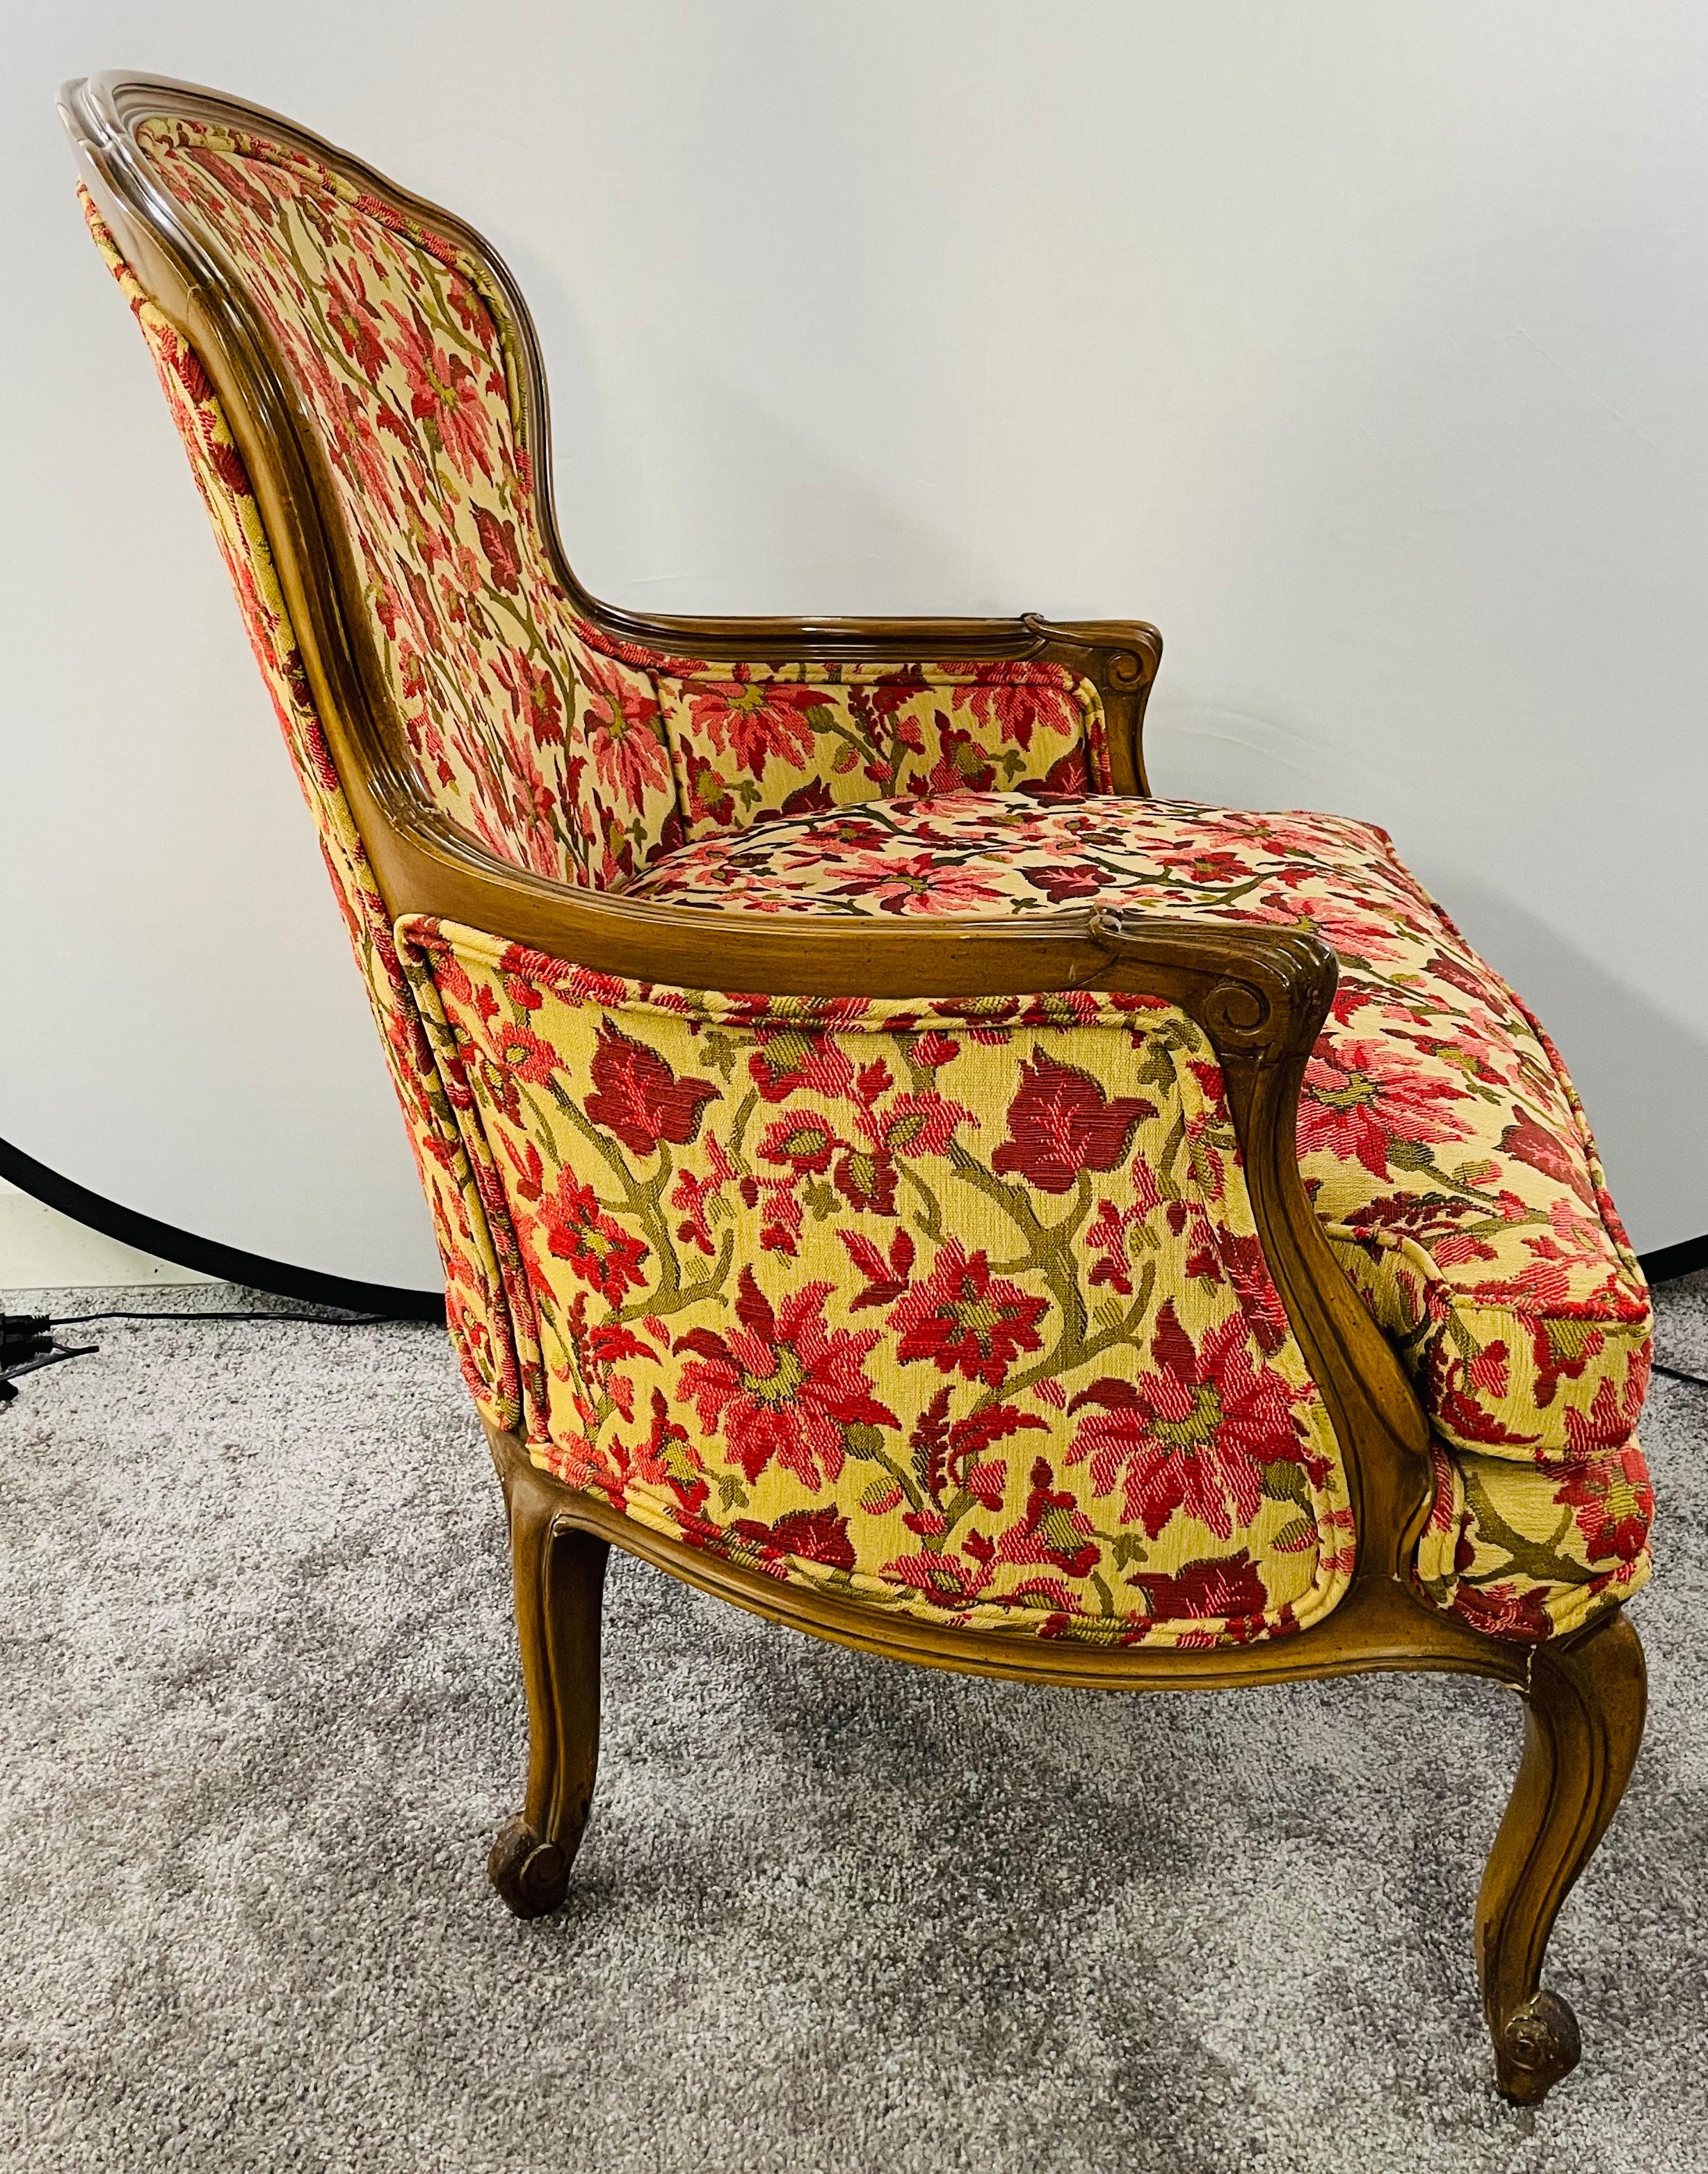 19th Century French Louis XV Bergere Arm Chair in a Fine Floral Upholstery For Sale 10